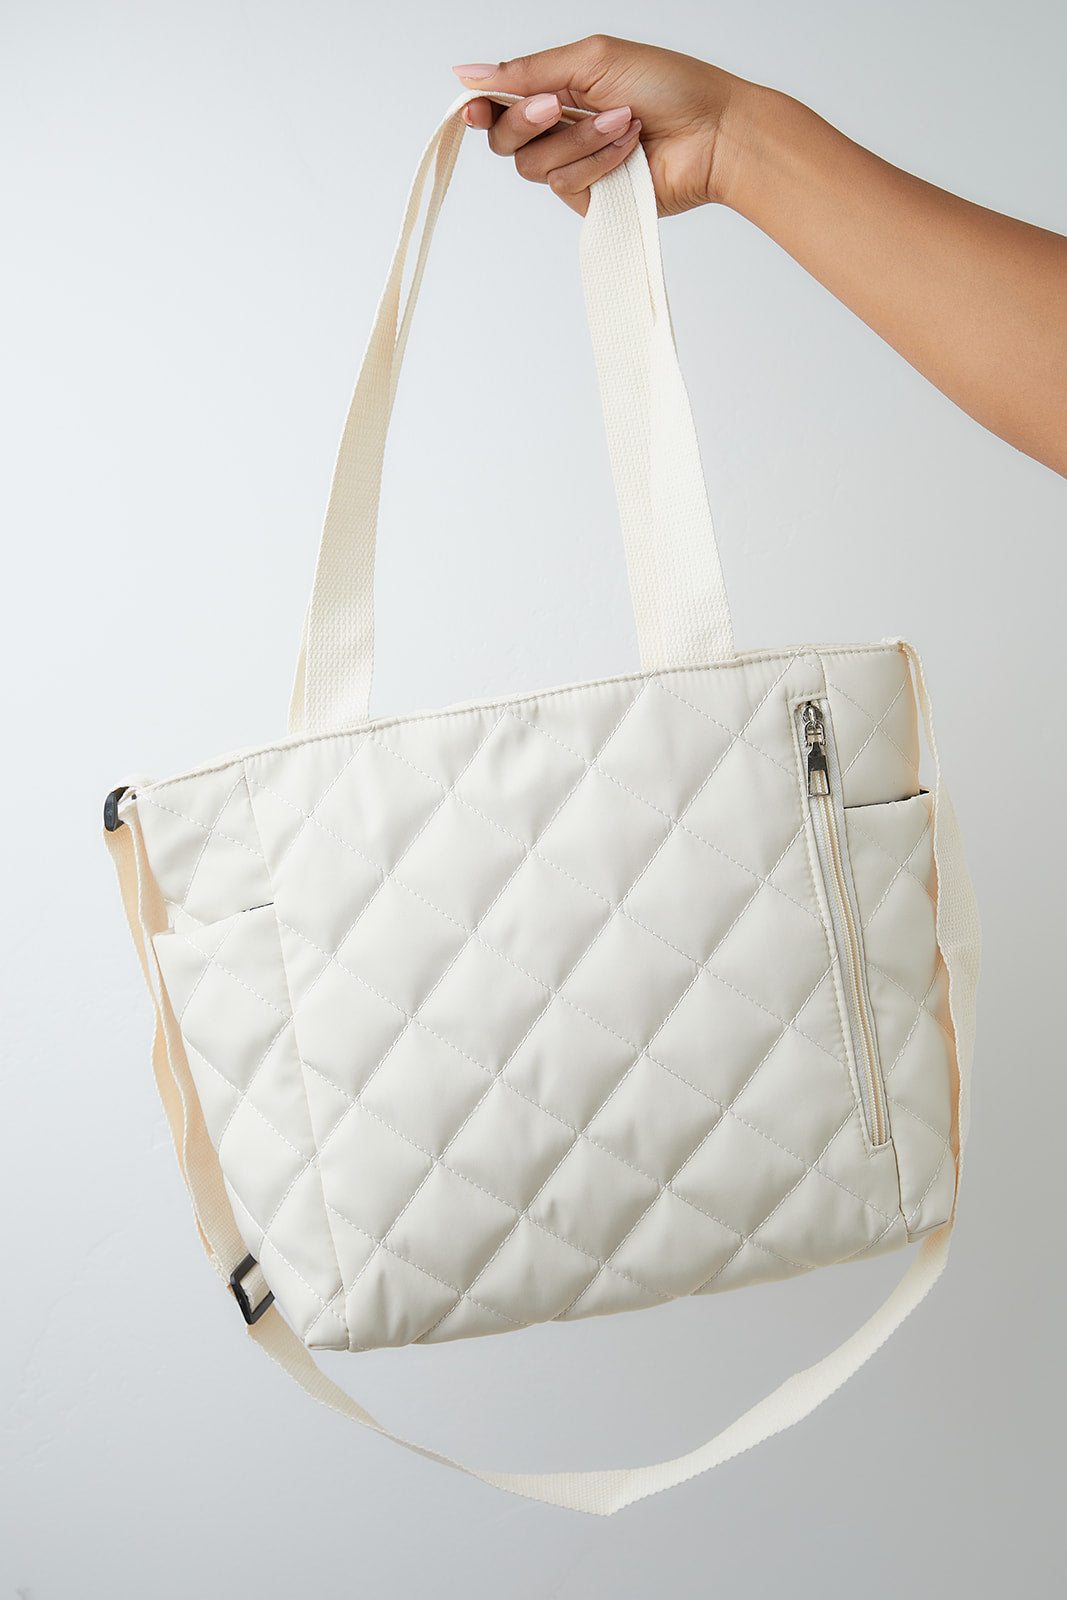 There She Goes Bag in Cream - 5/15/2023